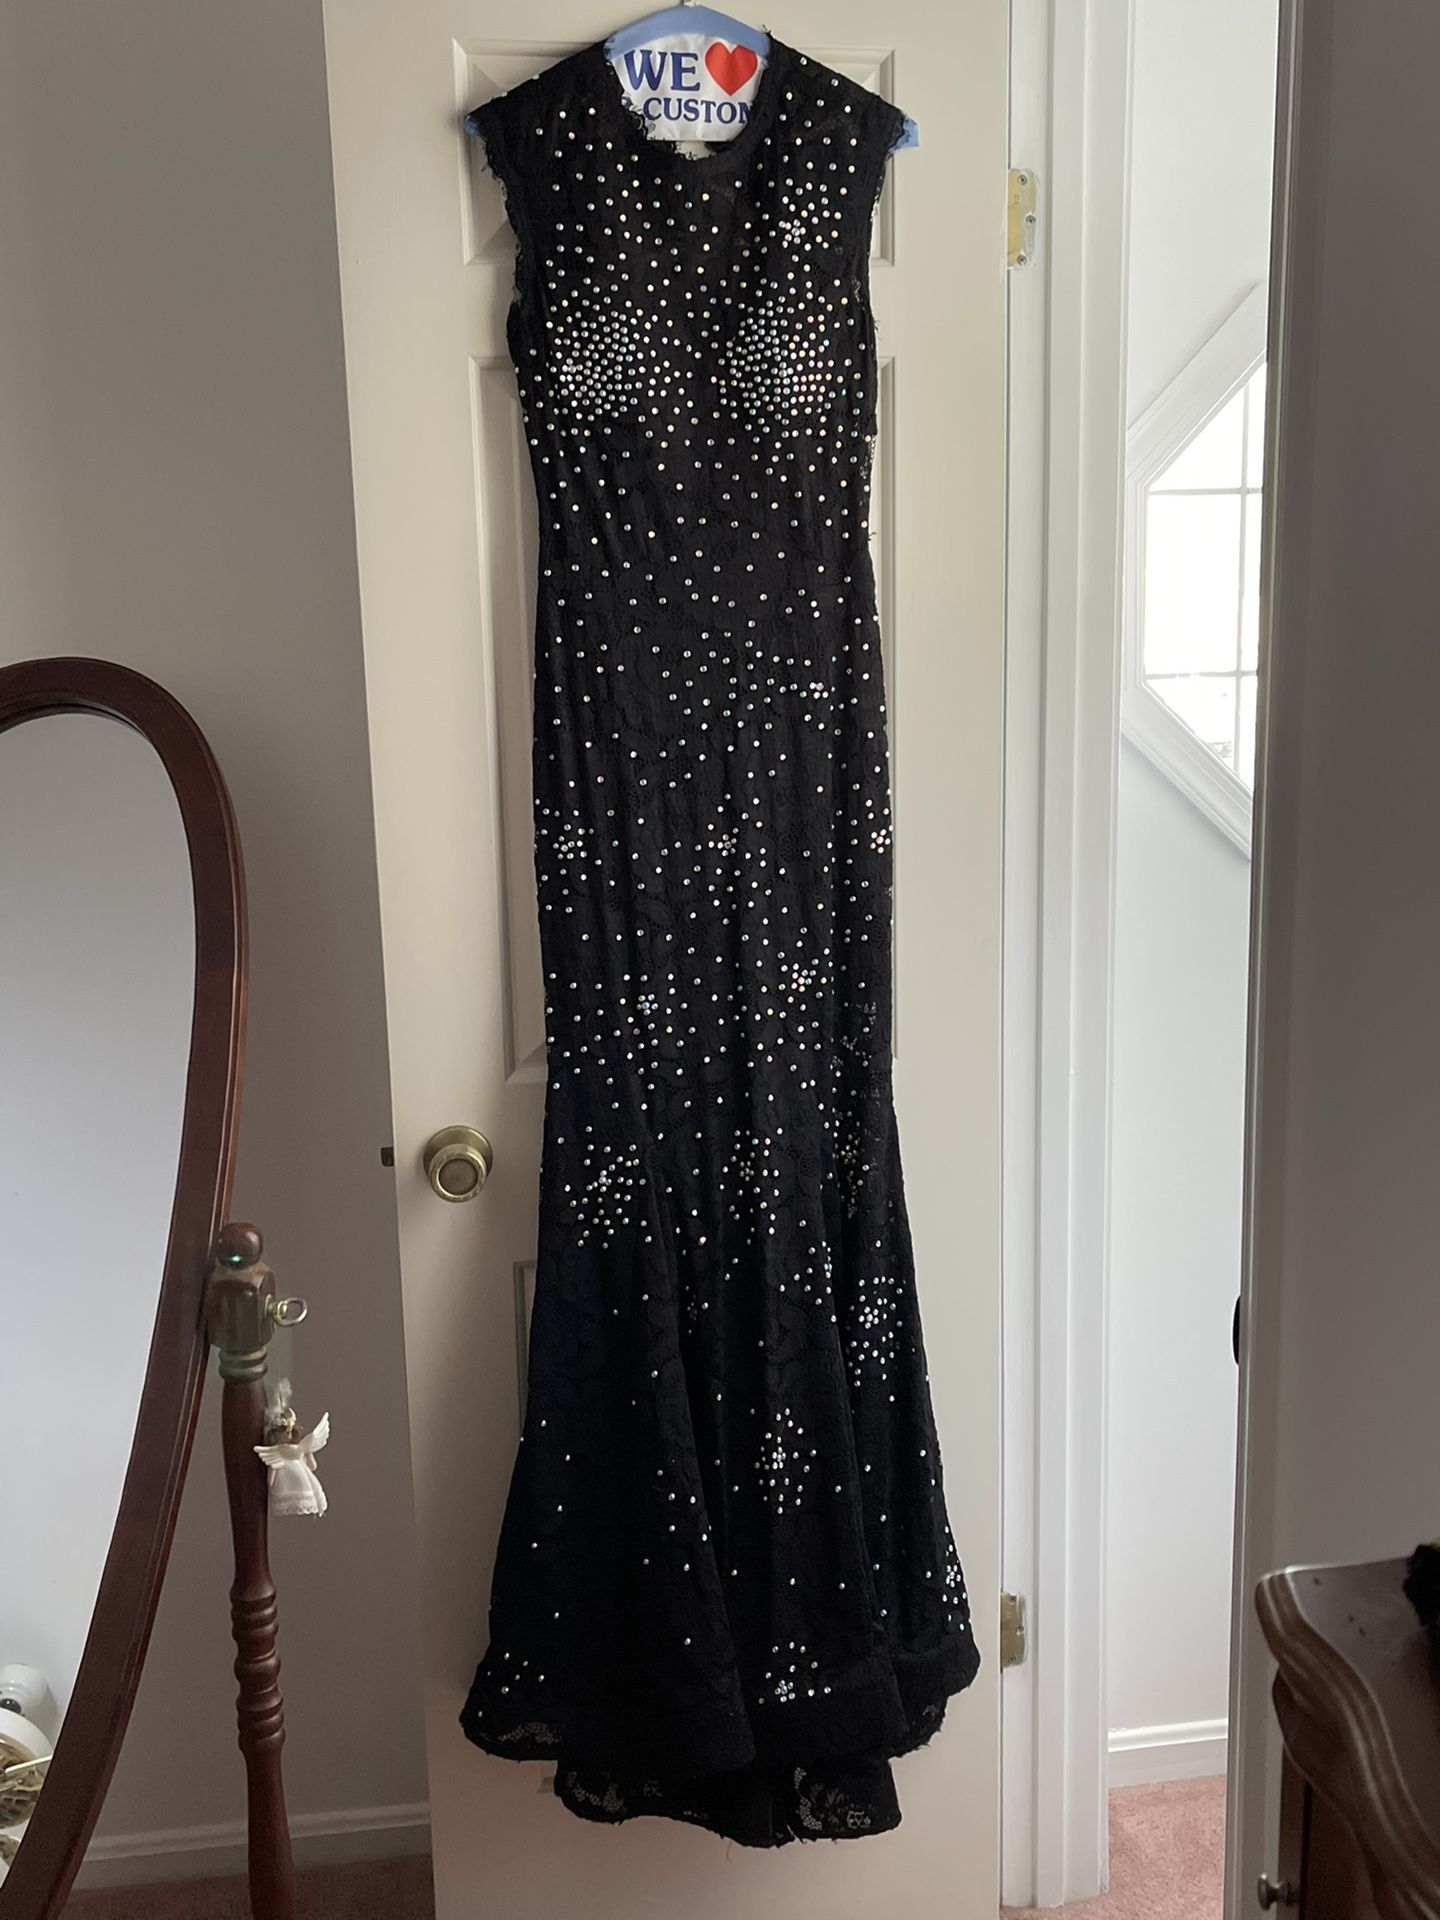 Prom Dress: Black Lace, Beaded, Mermaid Style Fit